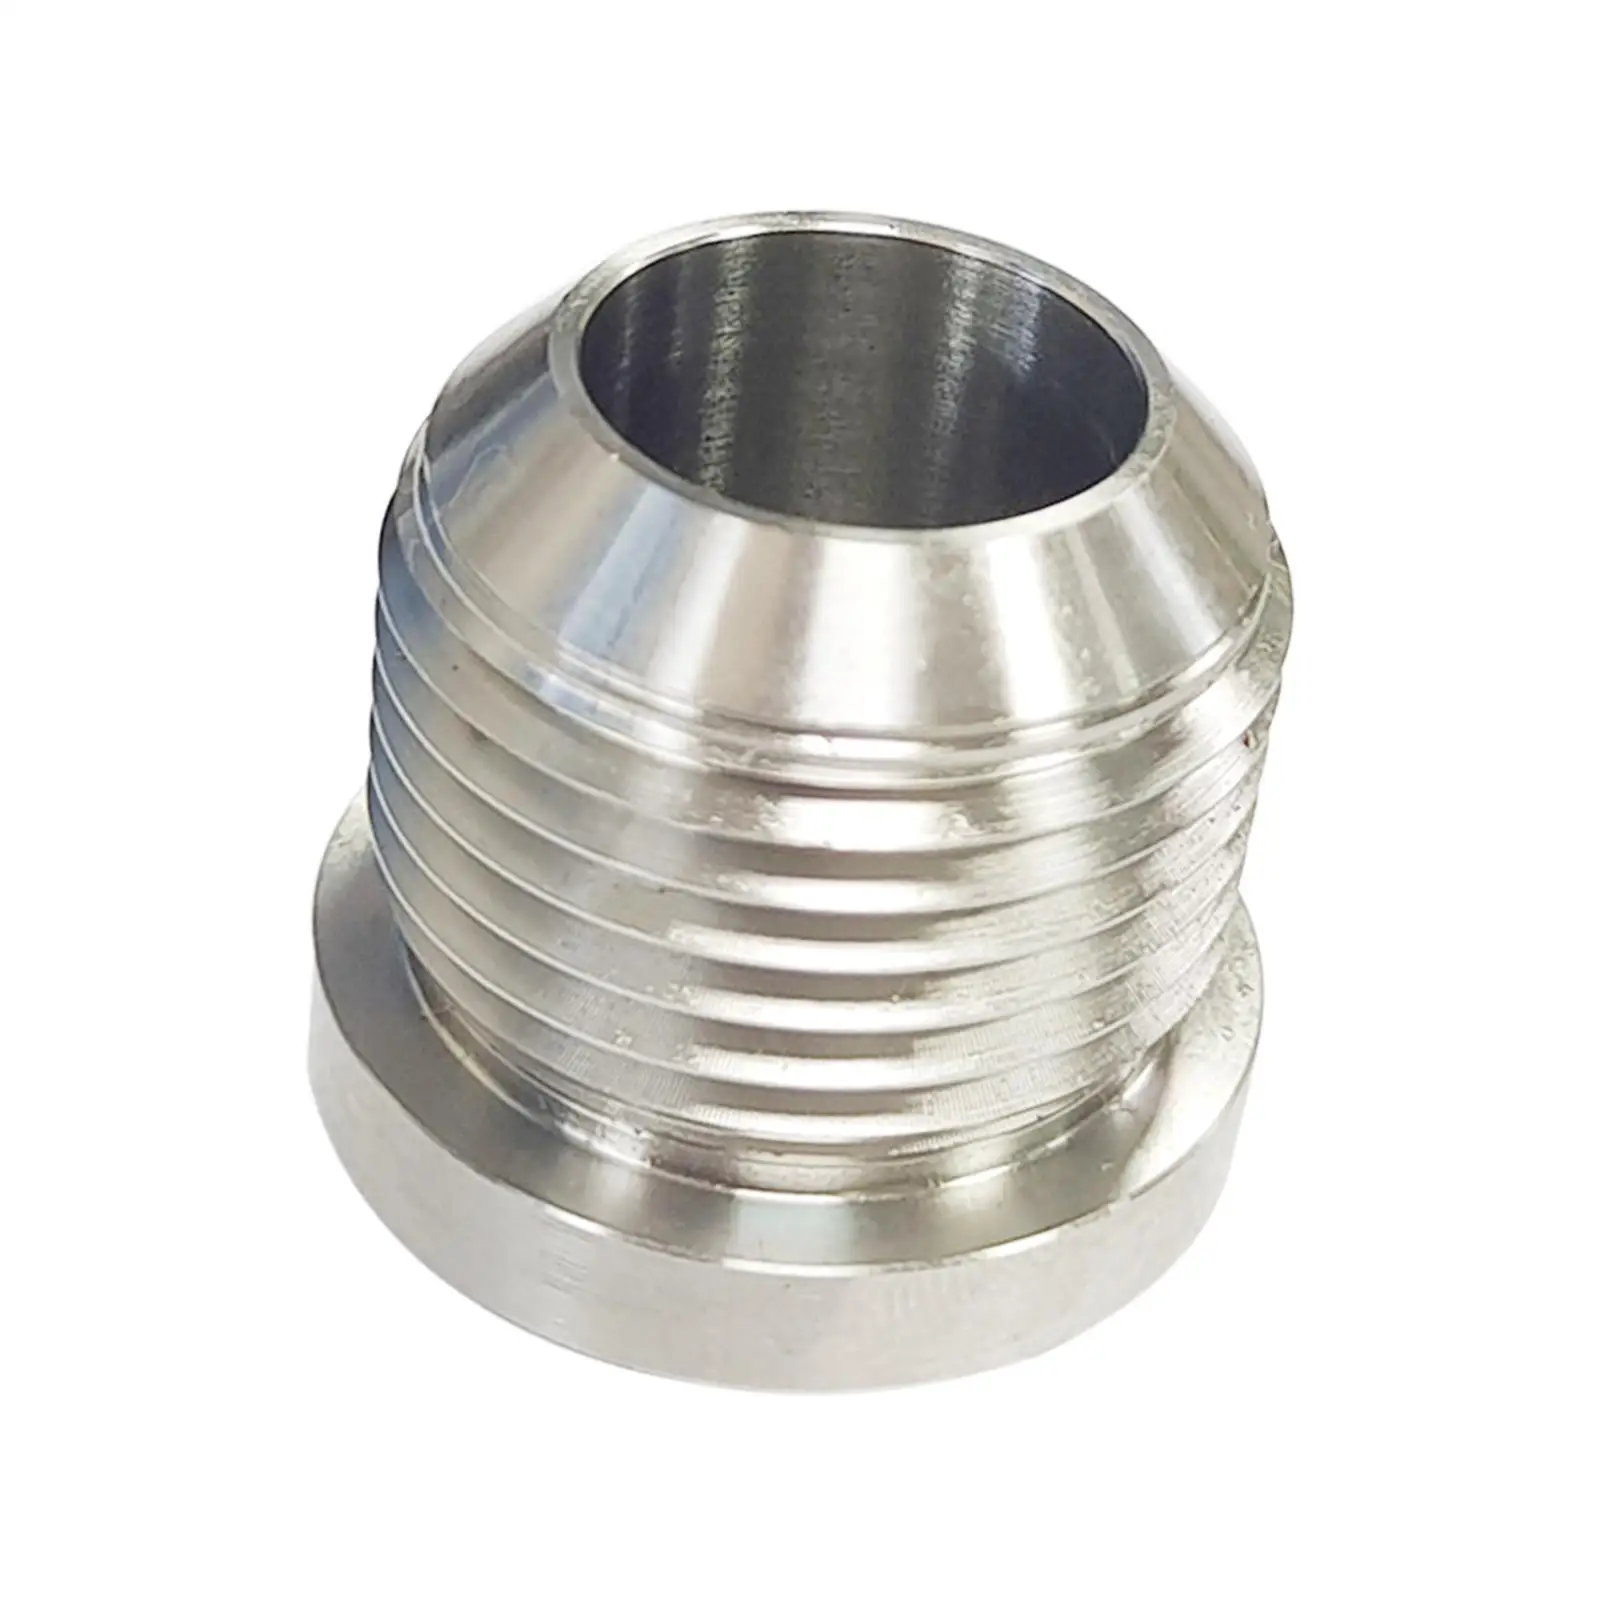 Stainless Steel Male Weld on Fitting Assembly Easy to Install Fuel Oil Coolant Fluid Air Bare Male Billet Weldable Fitting